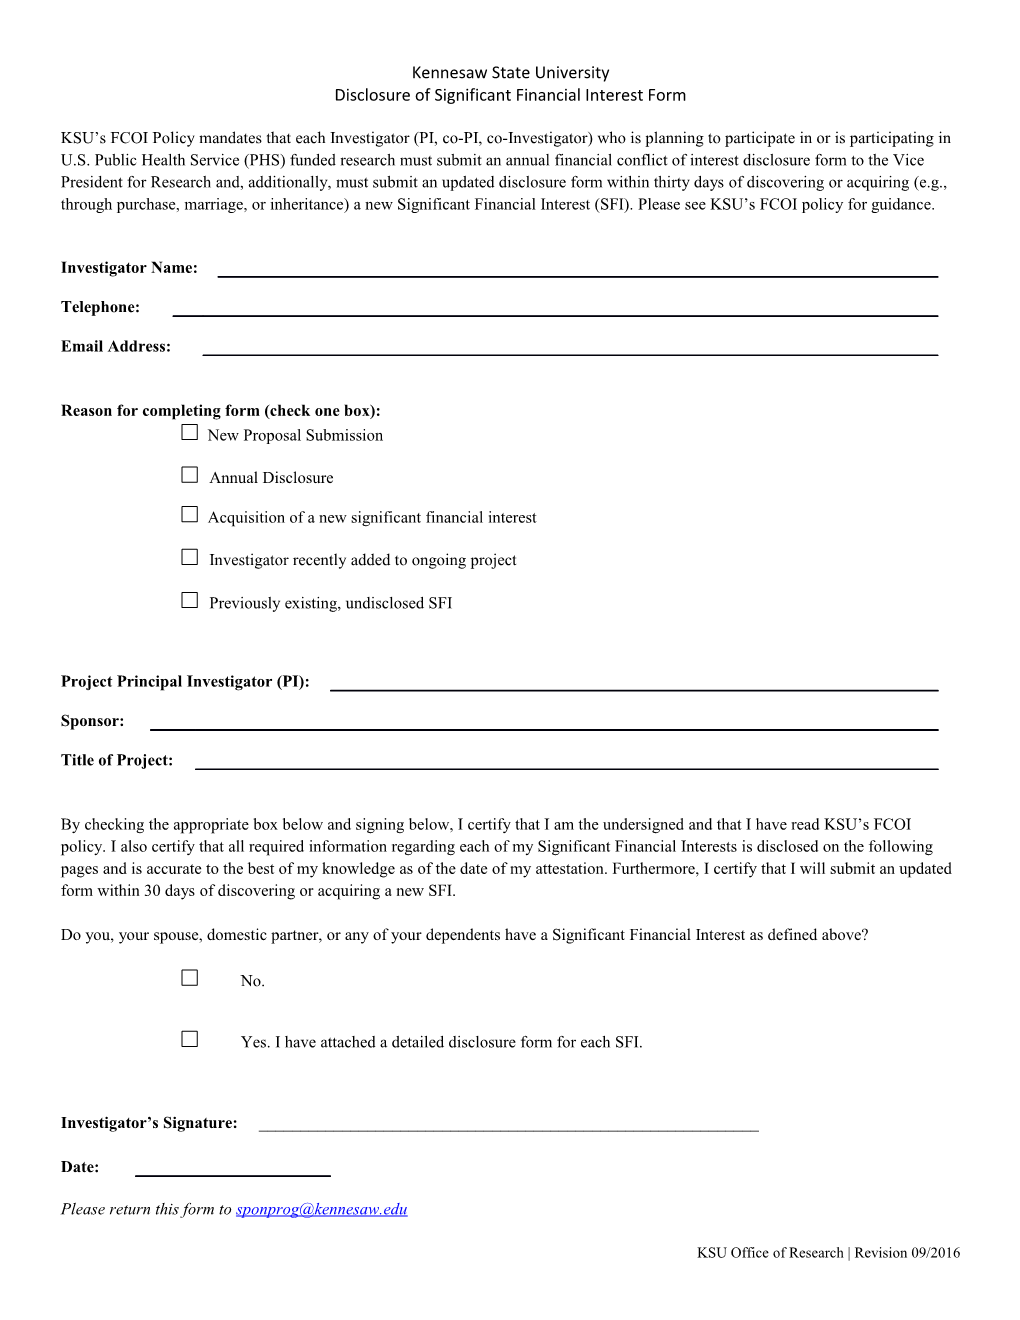 Disclosure of Significant Financial Interest Form